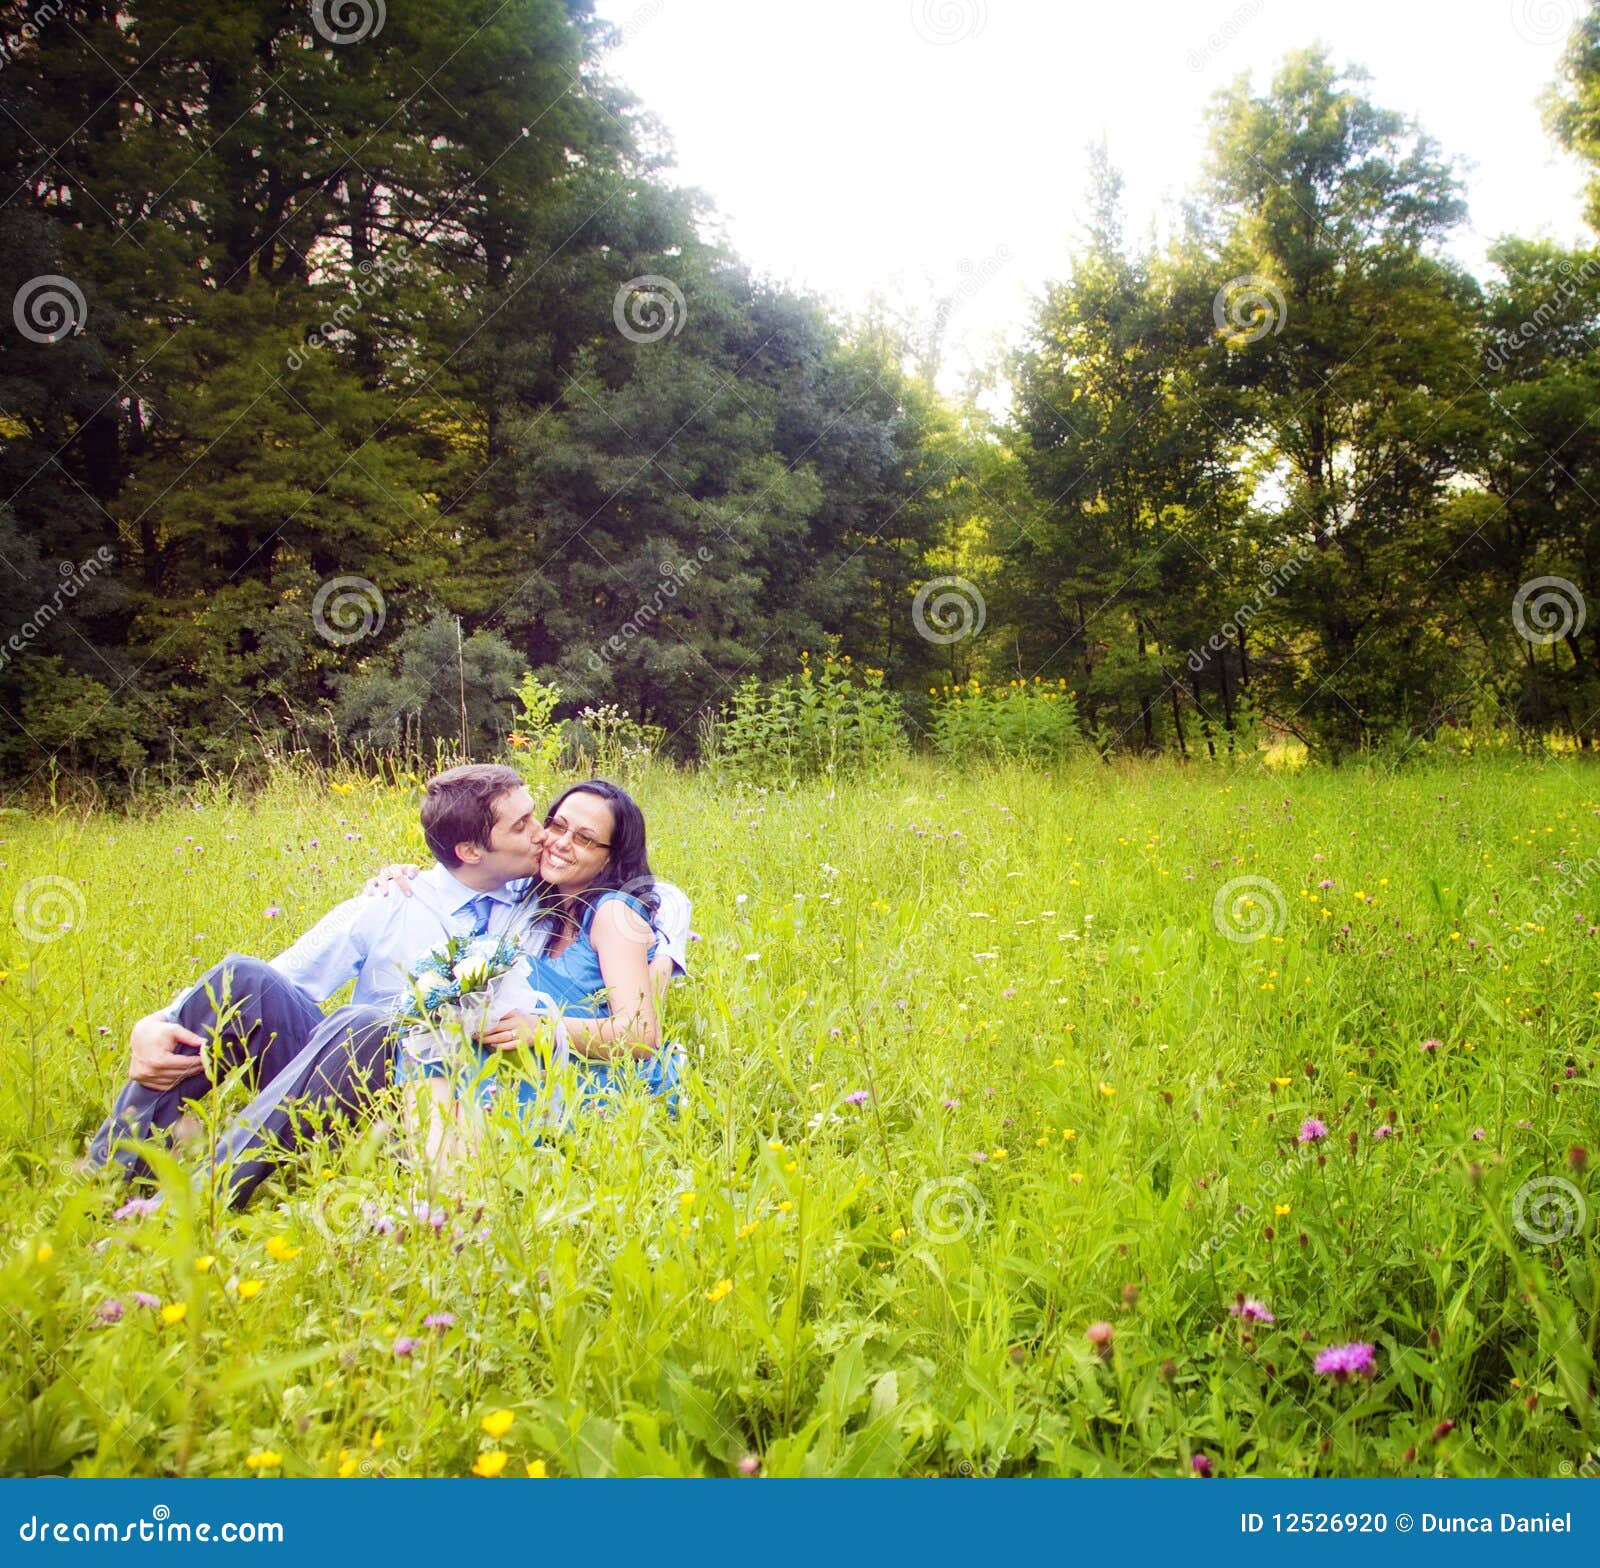 Kiss of Romantic Lovers in the Green Grass Stock Photo - Image of